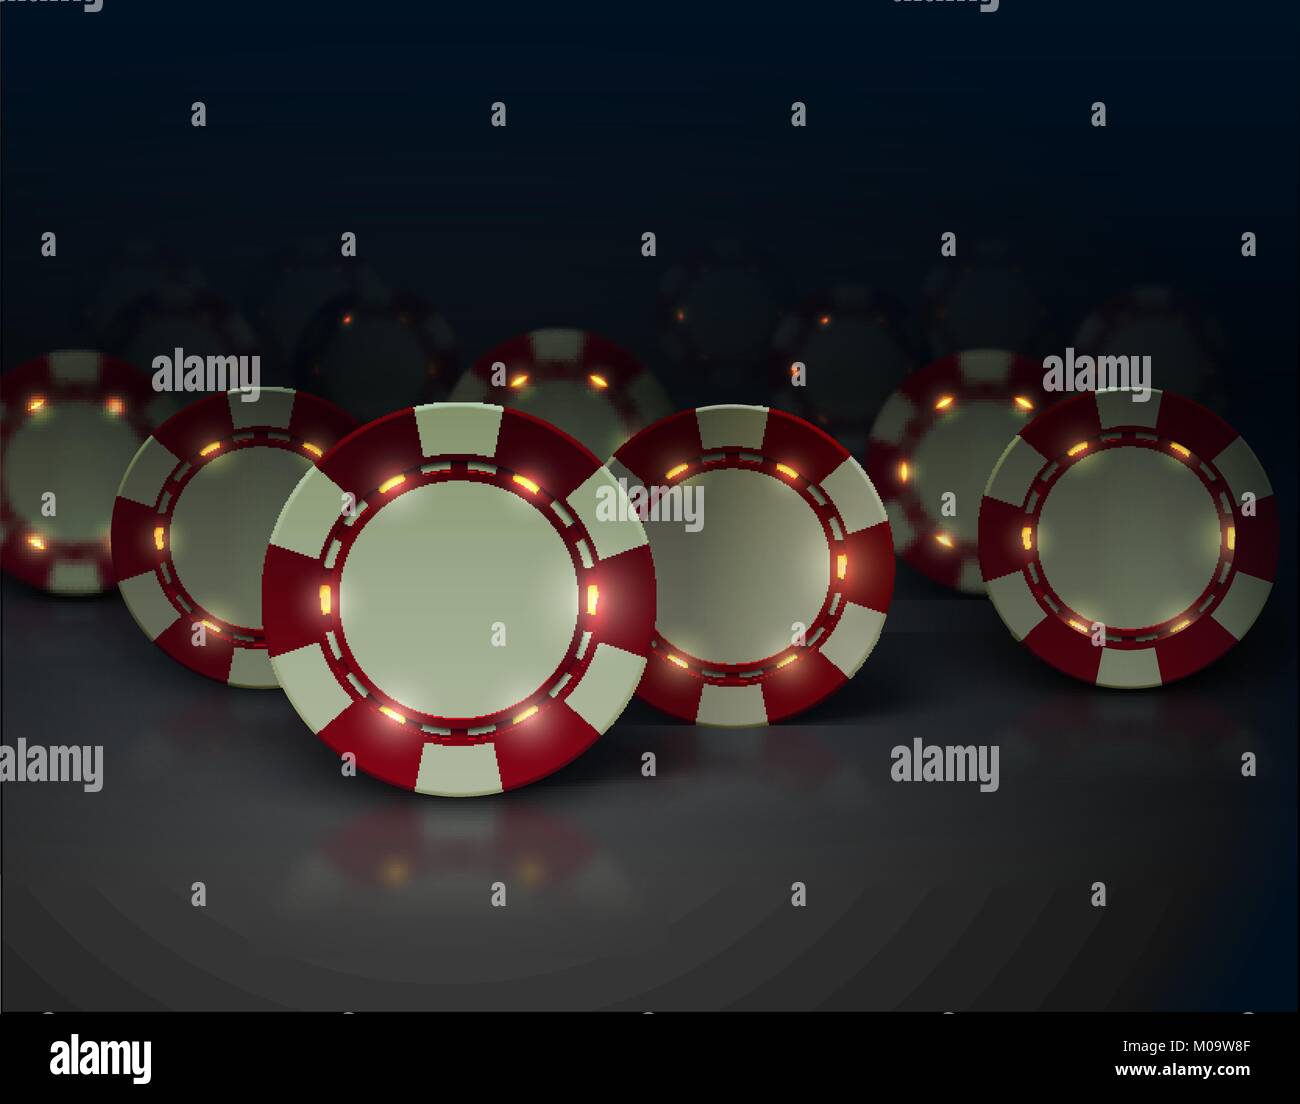 Vector casino poker chips with luminous lights elements. Dark background, glossy surface. White and red color. Group of objects with shadow Stock Vector